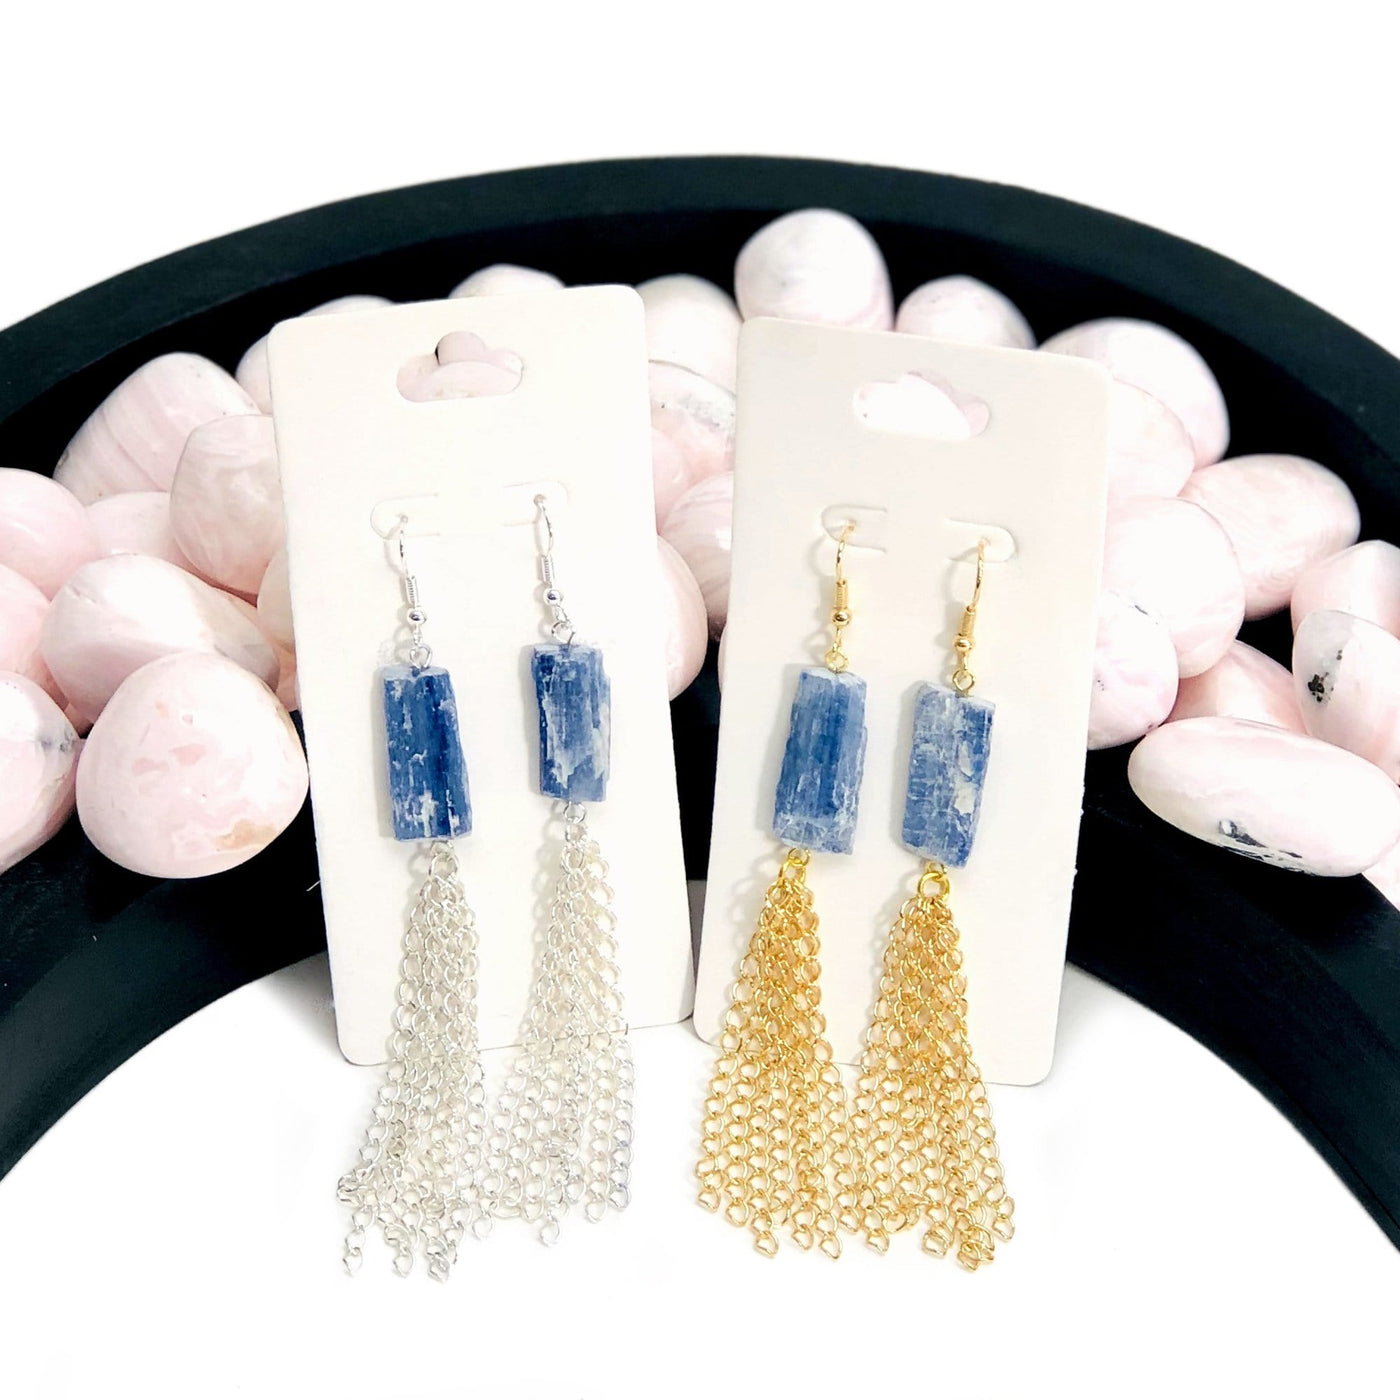 2 pairs of Blue Kyanite Dangle Earrings with Electroplated 24k Gold/Silver Tassels with decorations in the background